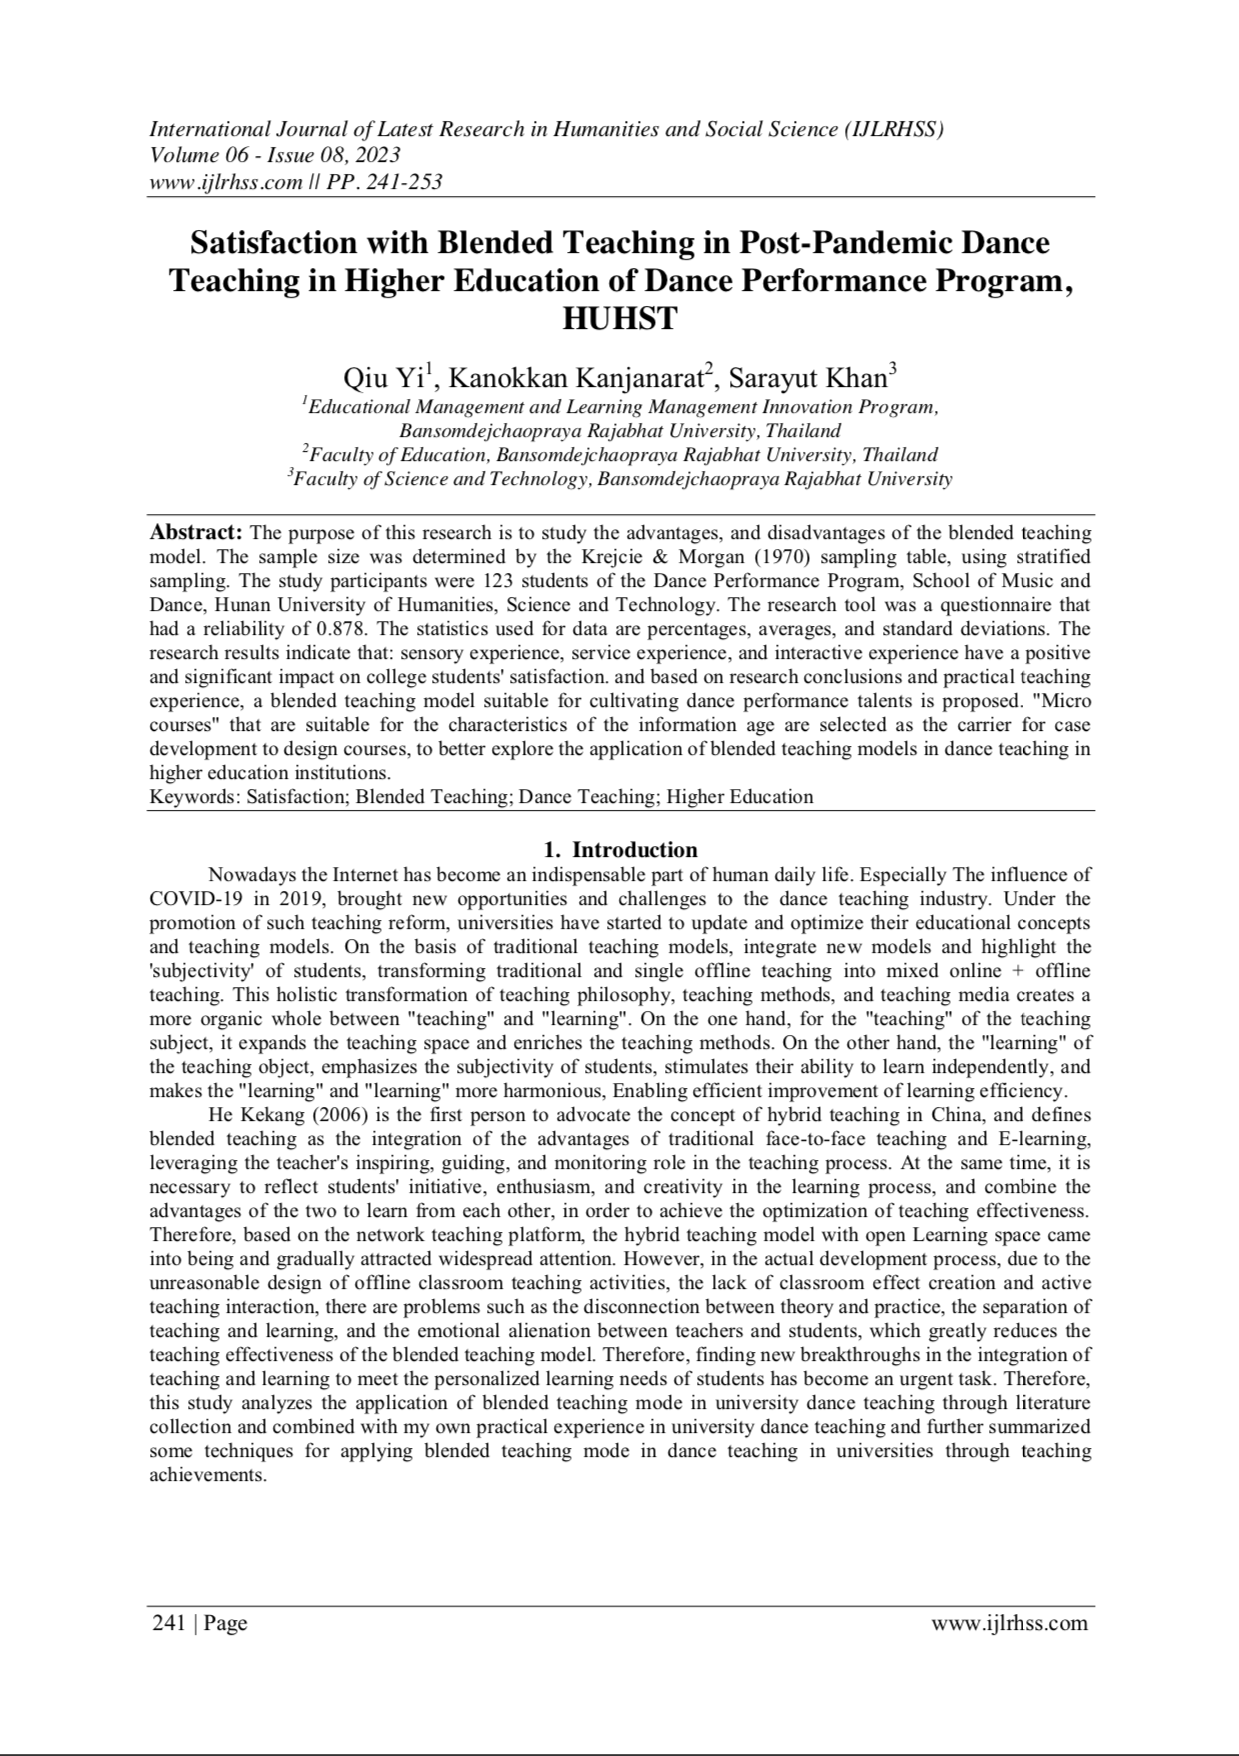 Satisfaction with blended teaching in post-pandemic dance teaching in higher education of dance performance program